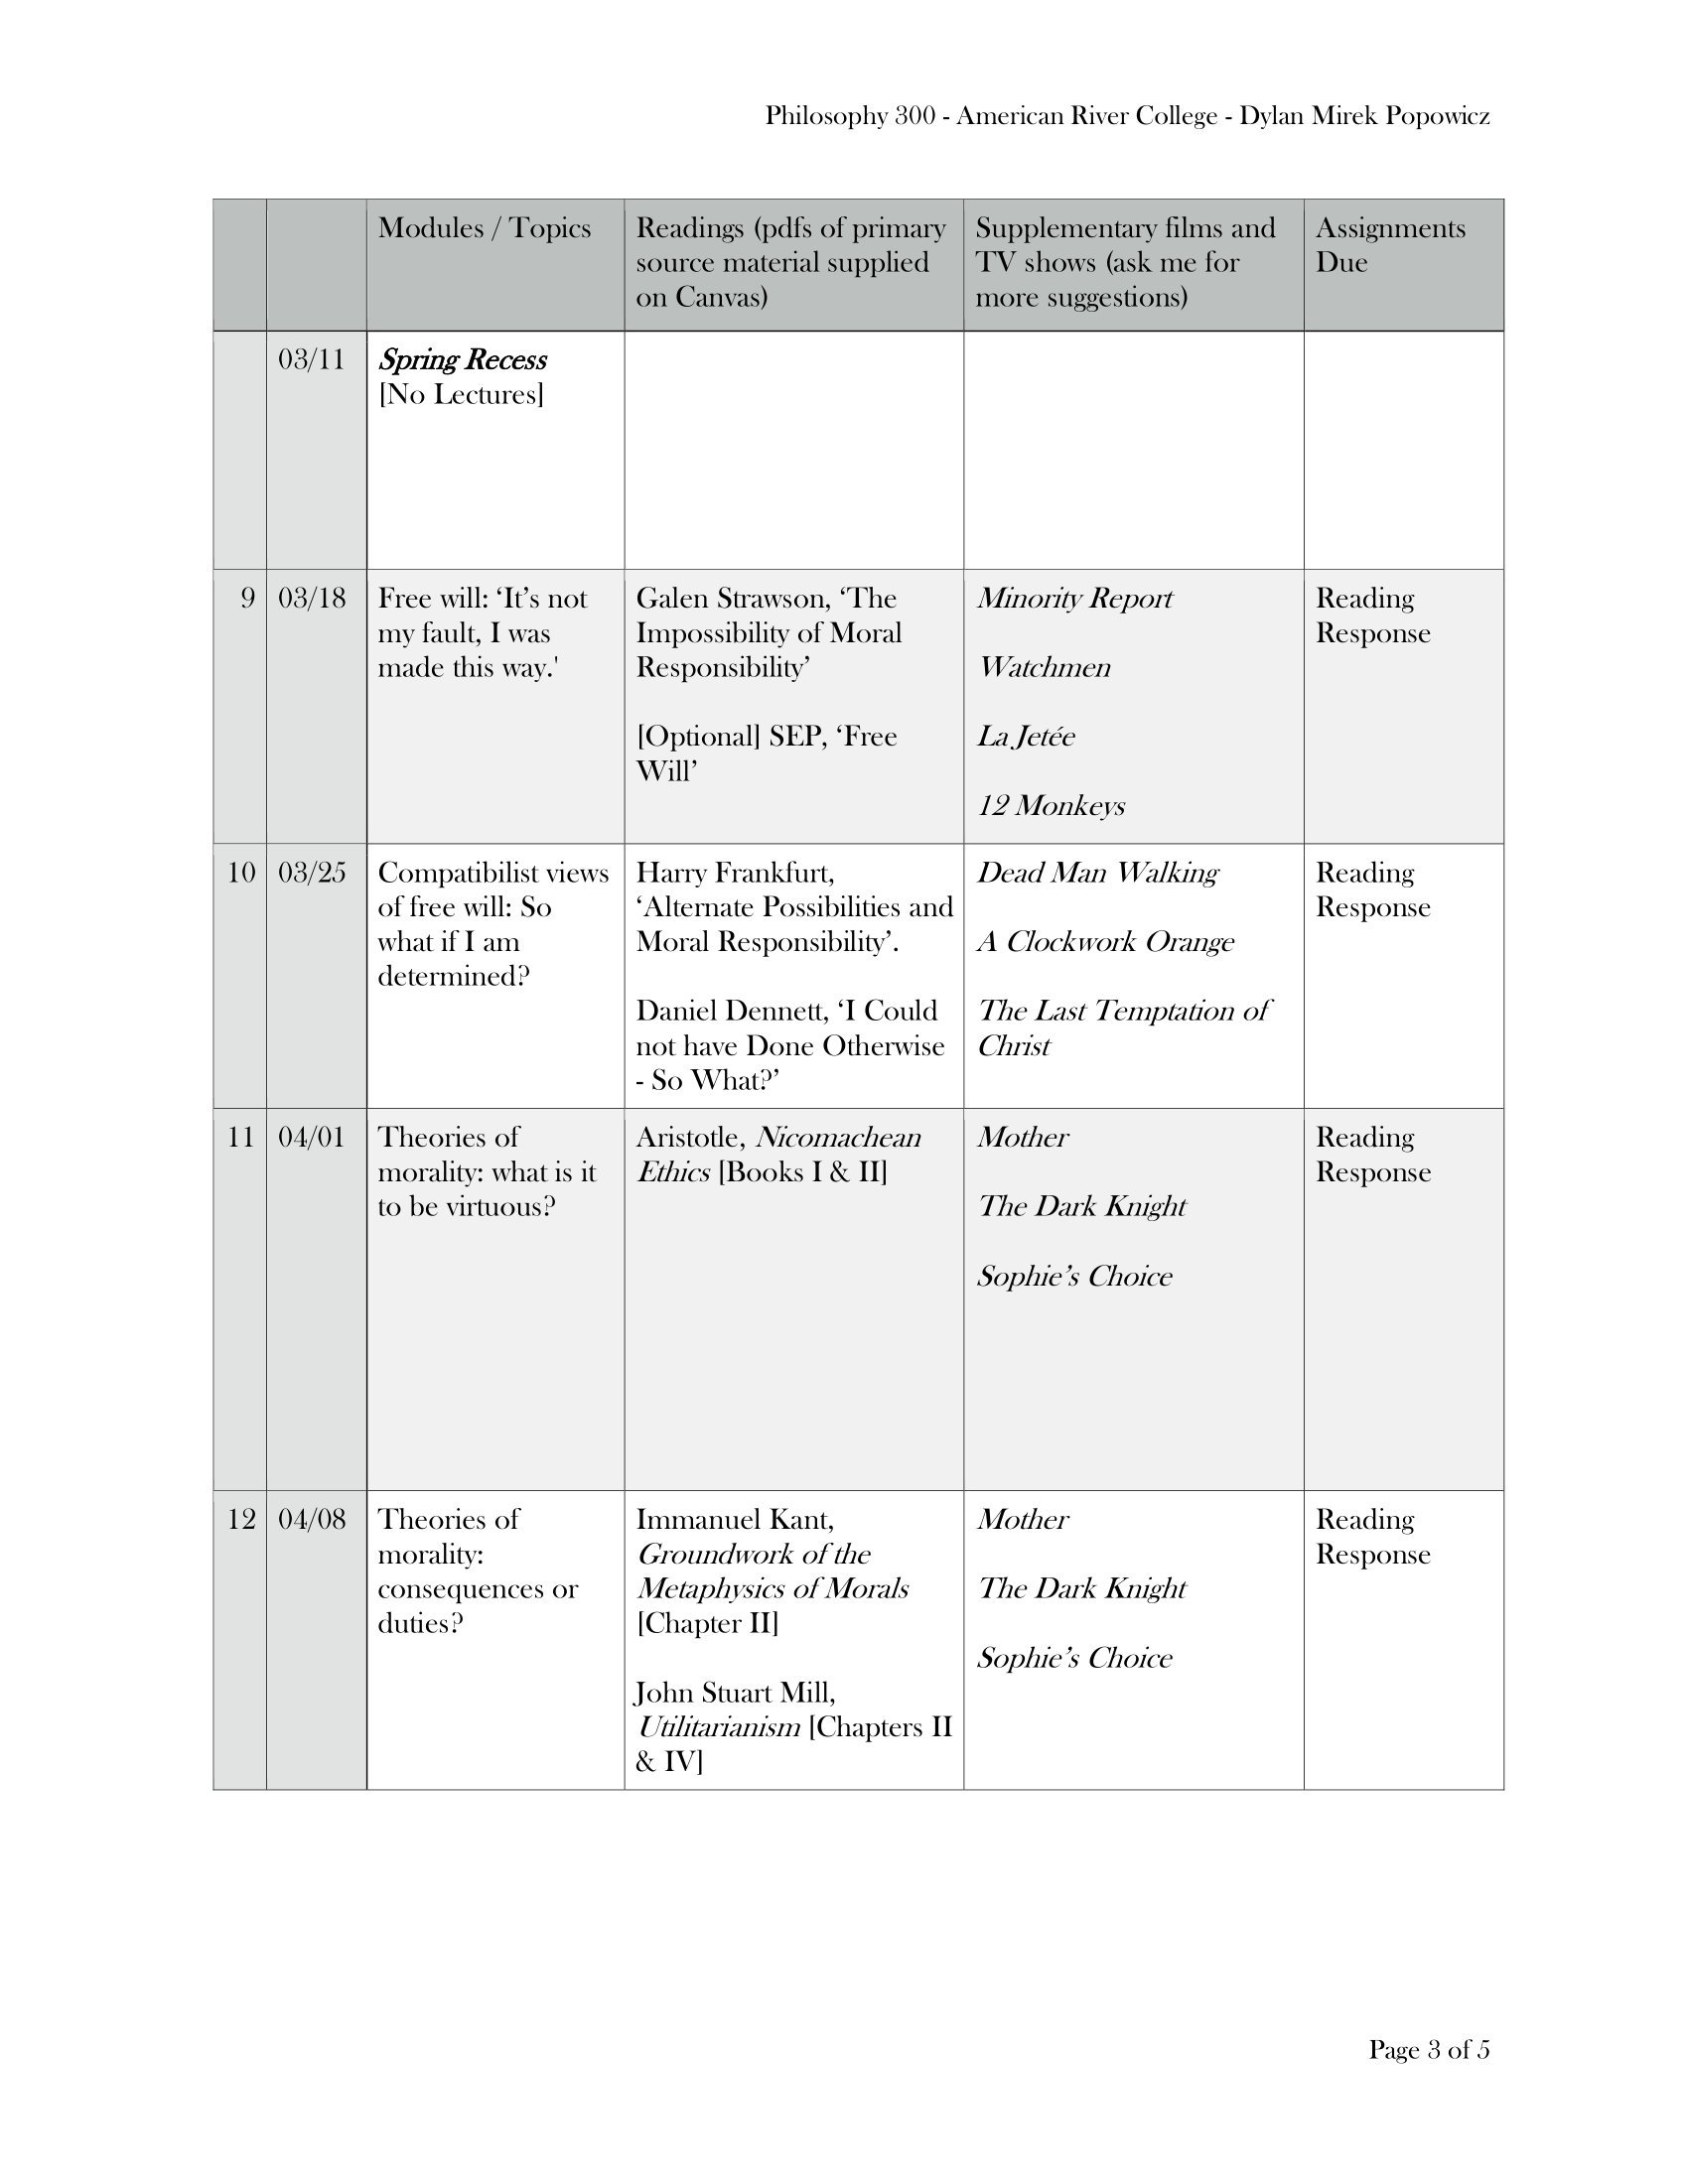 Course Schedule [in person]-3.jpg